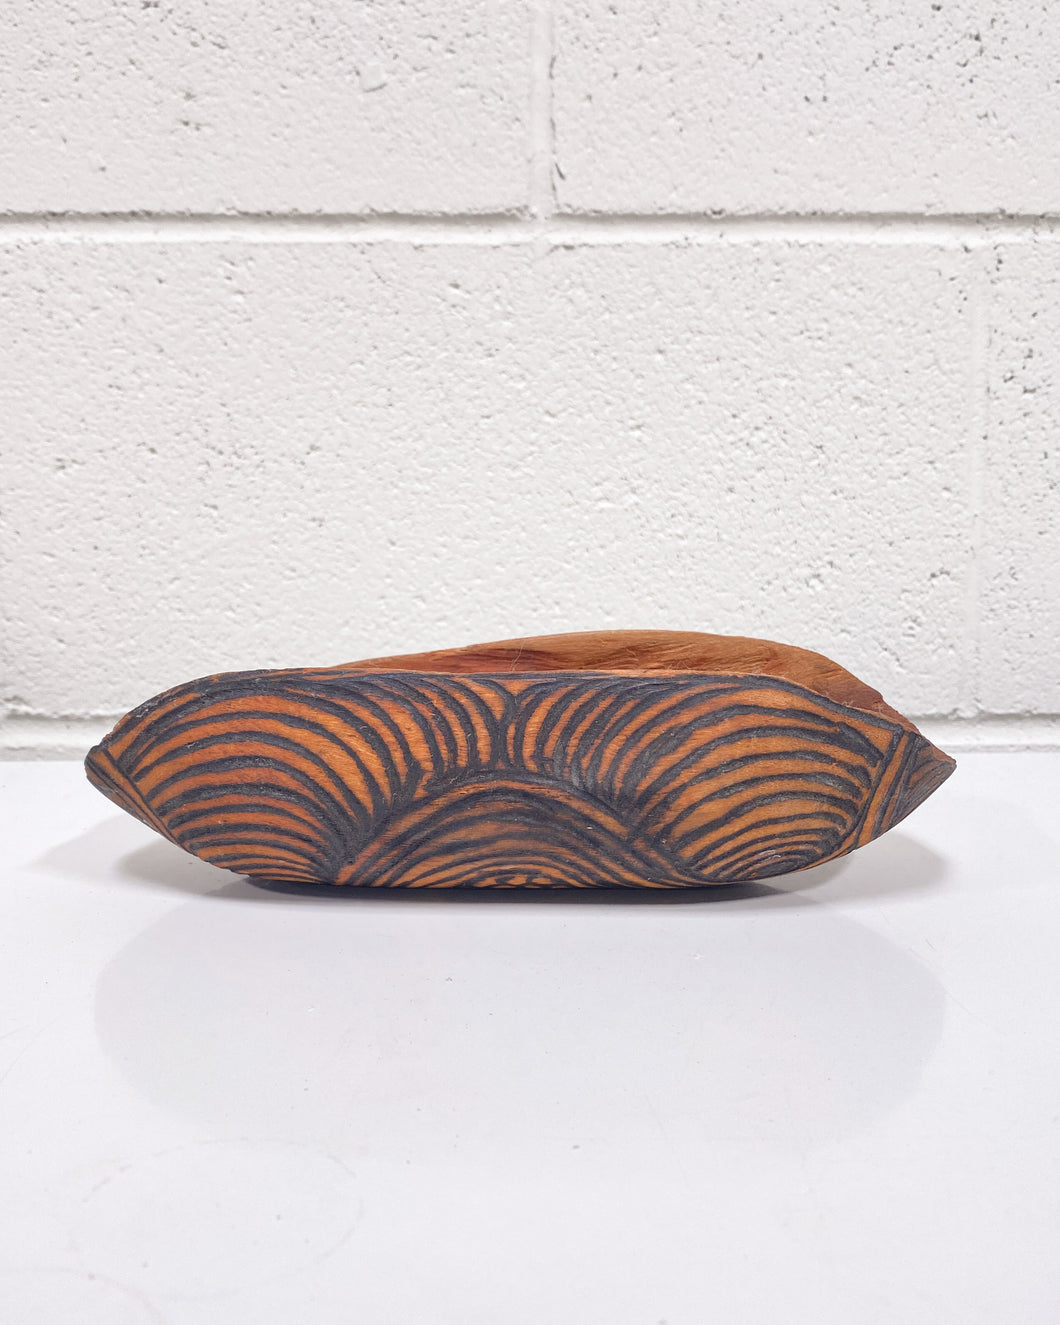 Vintage Carved Wood Ovular Tray with Swirls